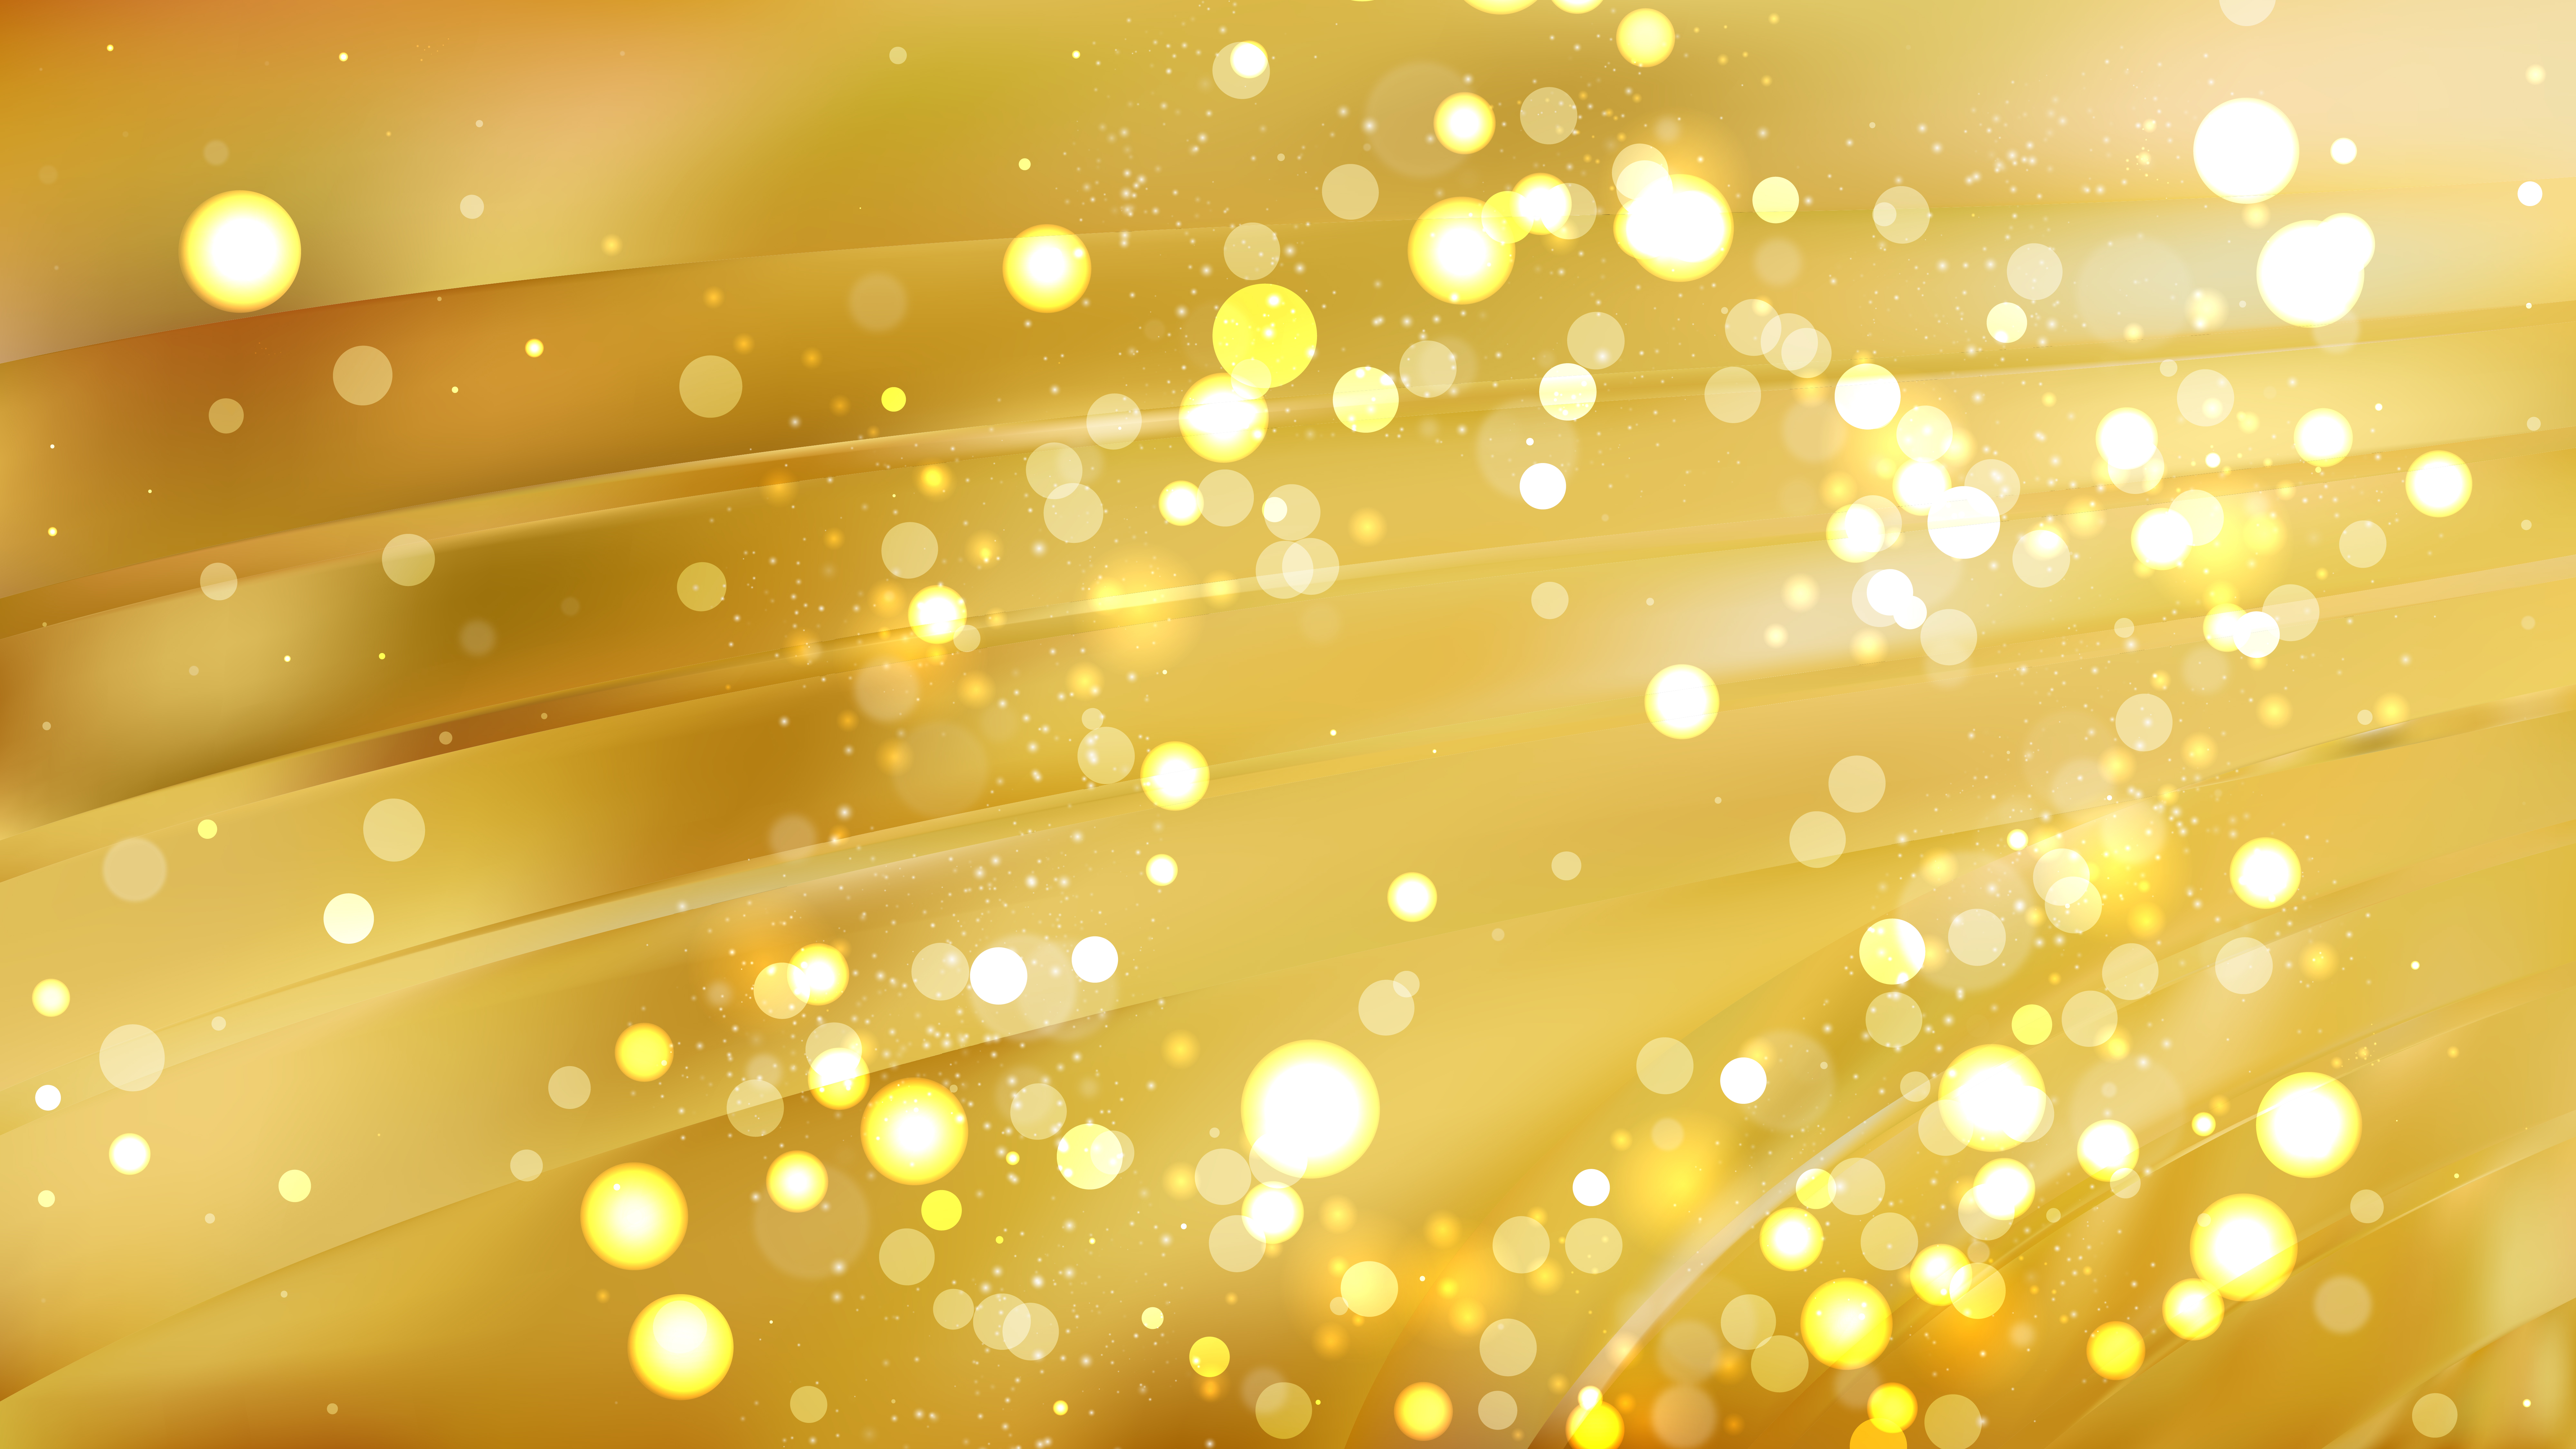 Free Abstract Gold Blurred Lights Background Vector